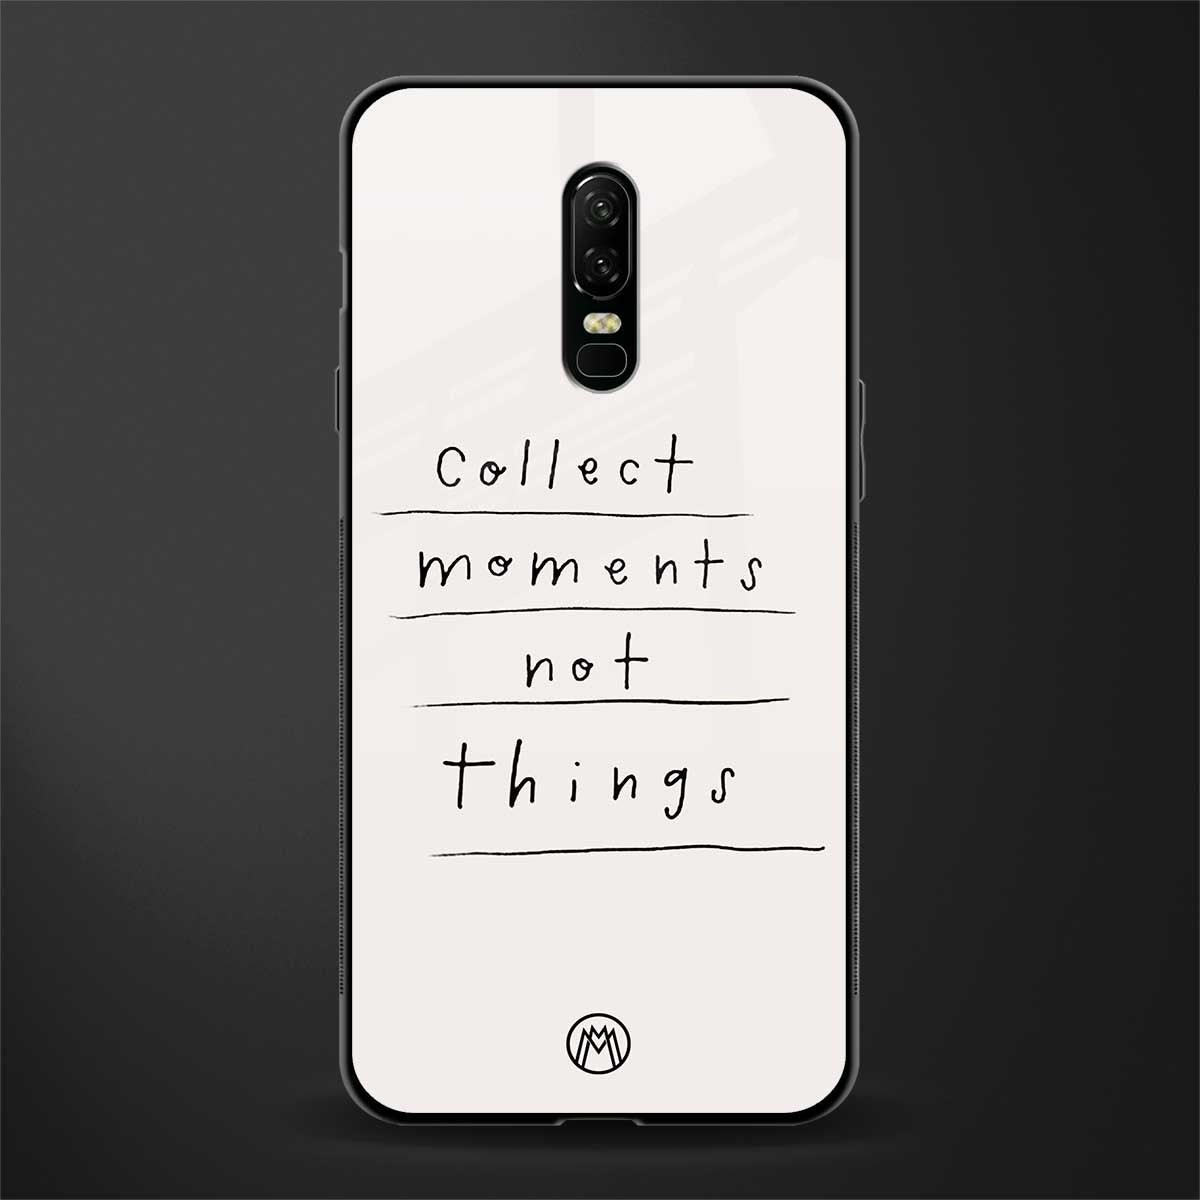 collect moments not things glass case for oneplus 6 image